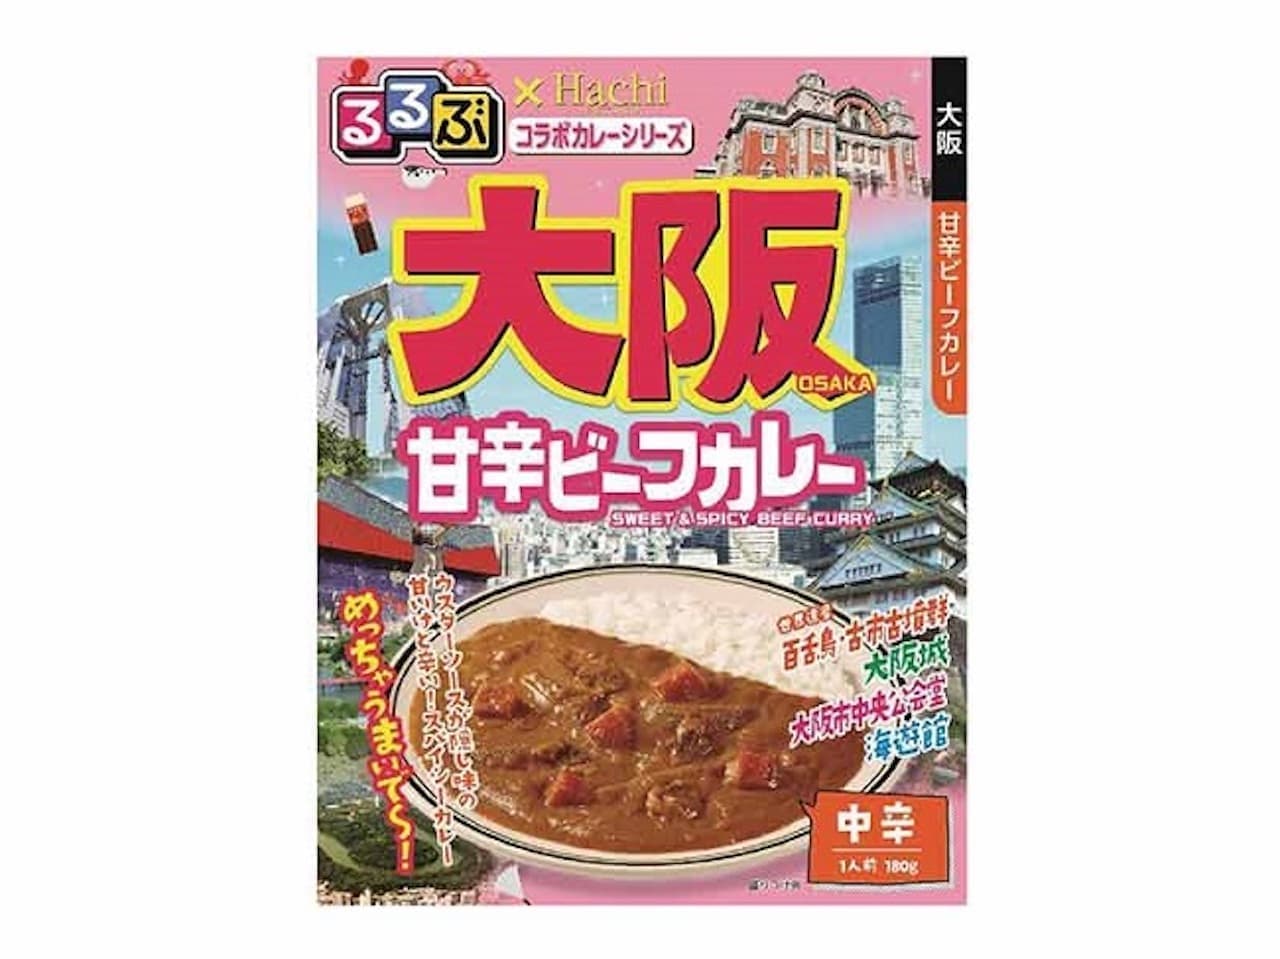 Lawson Store "Rurubu x Hachi Collaboration Curry Series Osaka Sweet and Spicy Beef Curry Medium Spicy"